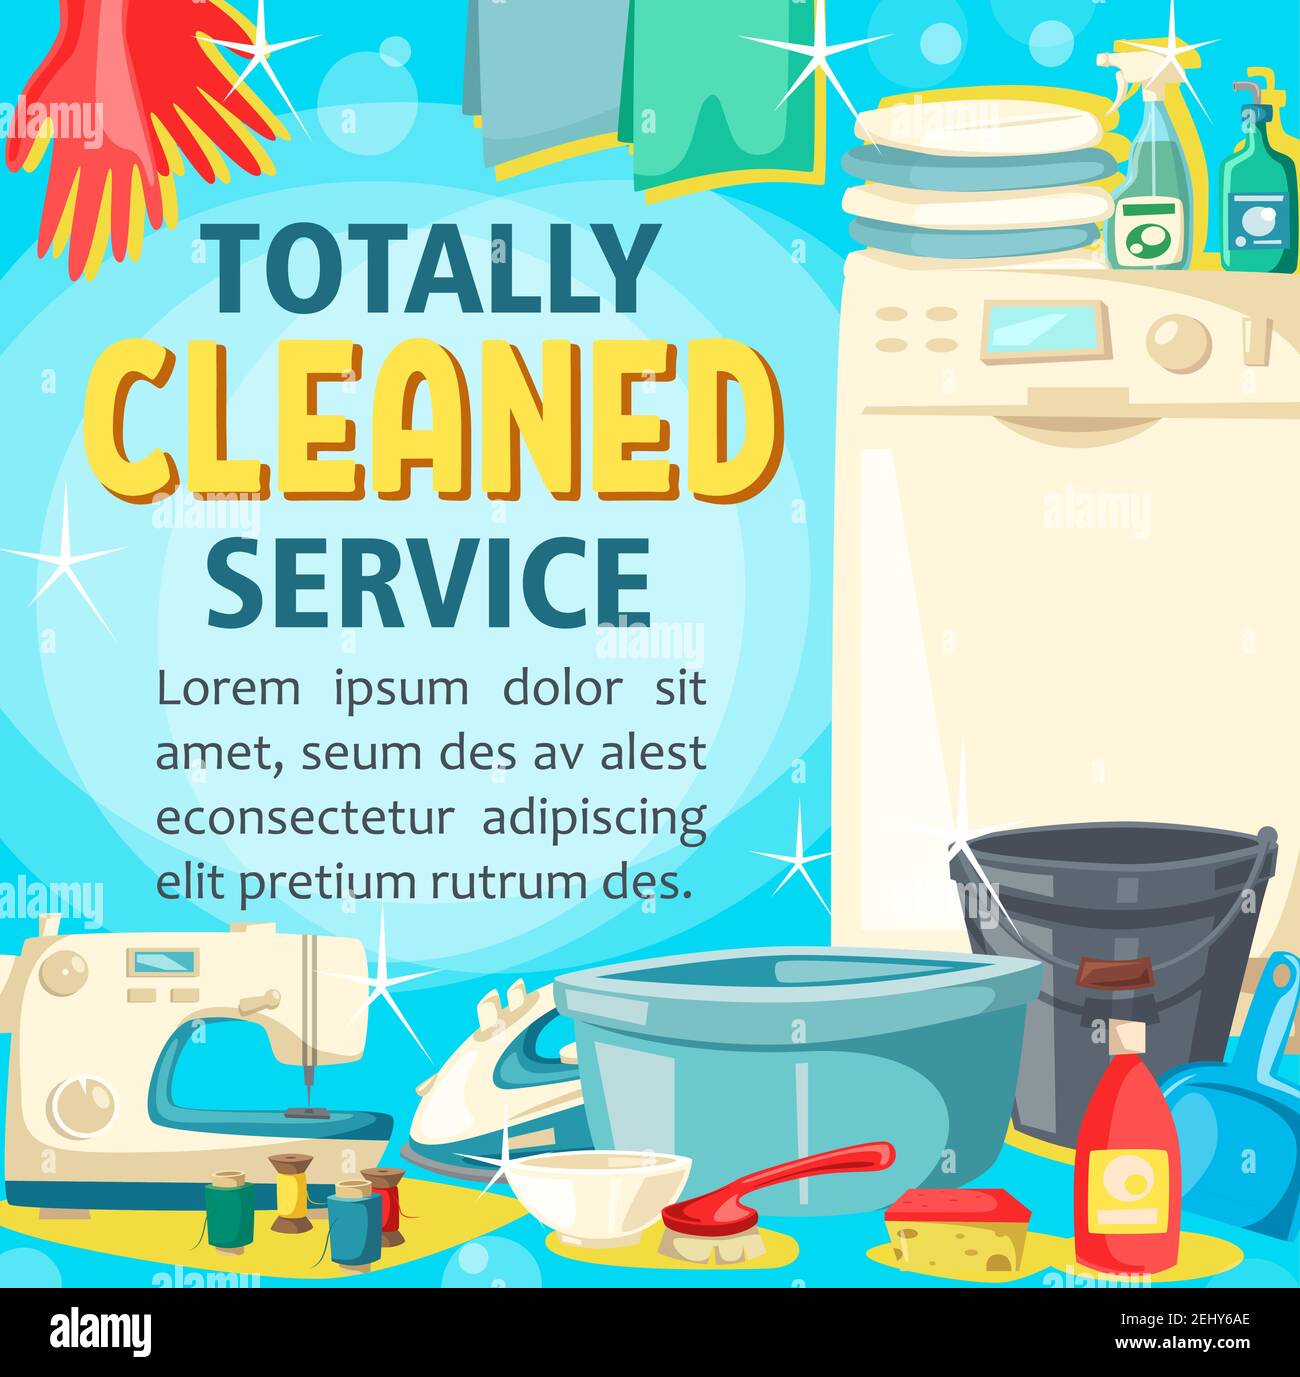 https://c8.alamy.com/comp/2EHY6AE/house-cleaning-service-poster-home-washing-sewing-and-laundry-vector-professional-housekeeping-tool-floor-and-window-glass-polisher-or-washing-mac-2EHY6AE.jpg